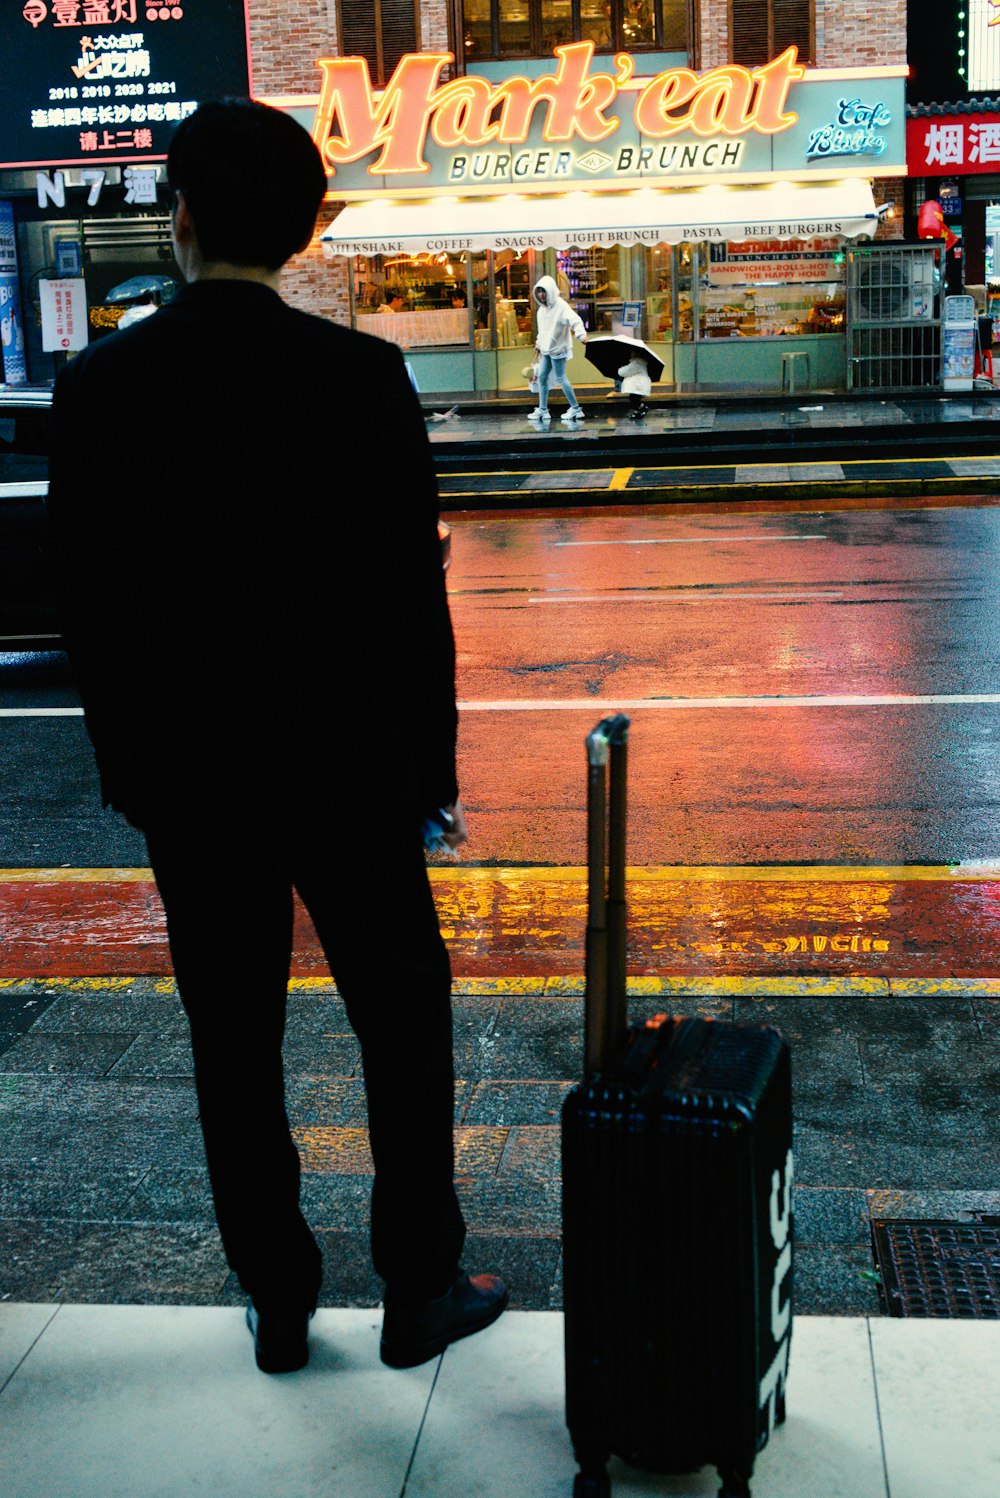 a man with a suitcase waiting for a bus